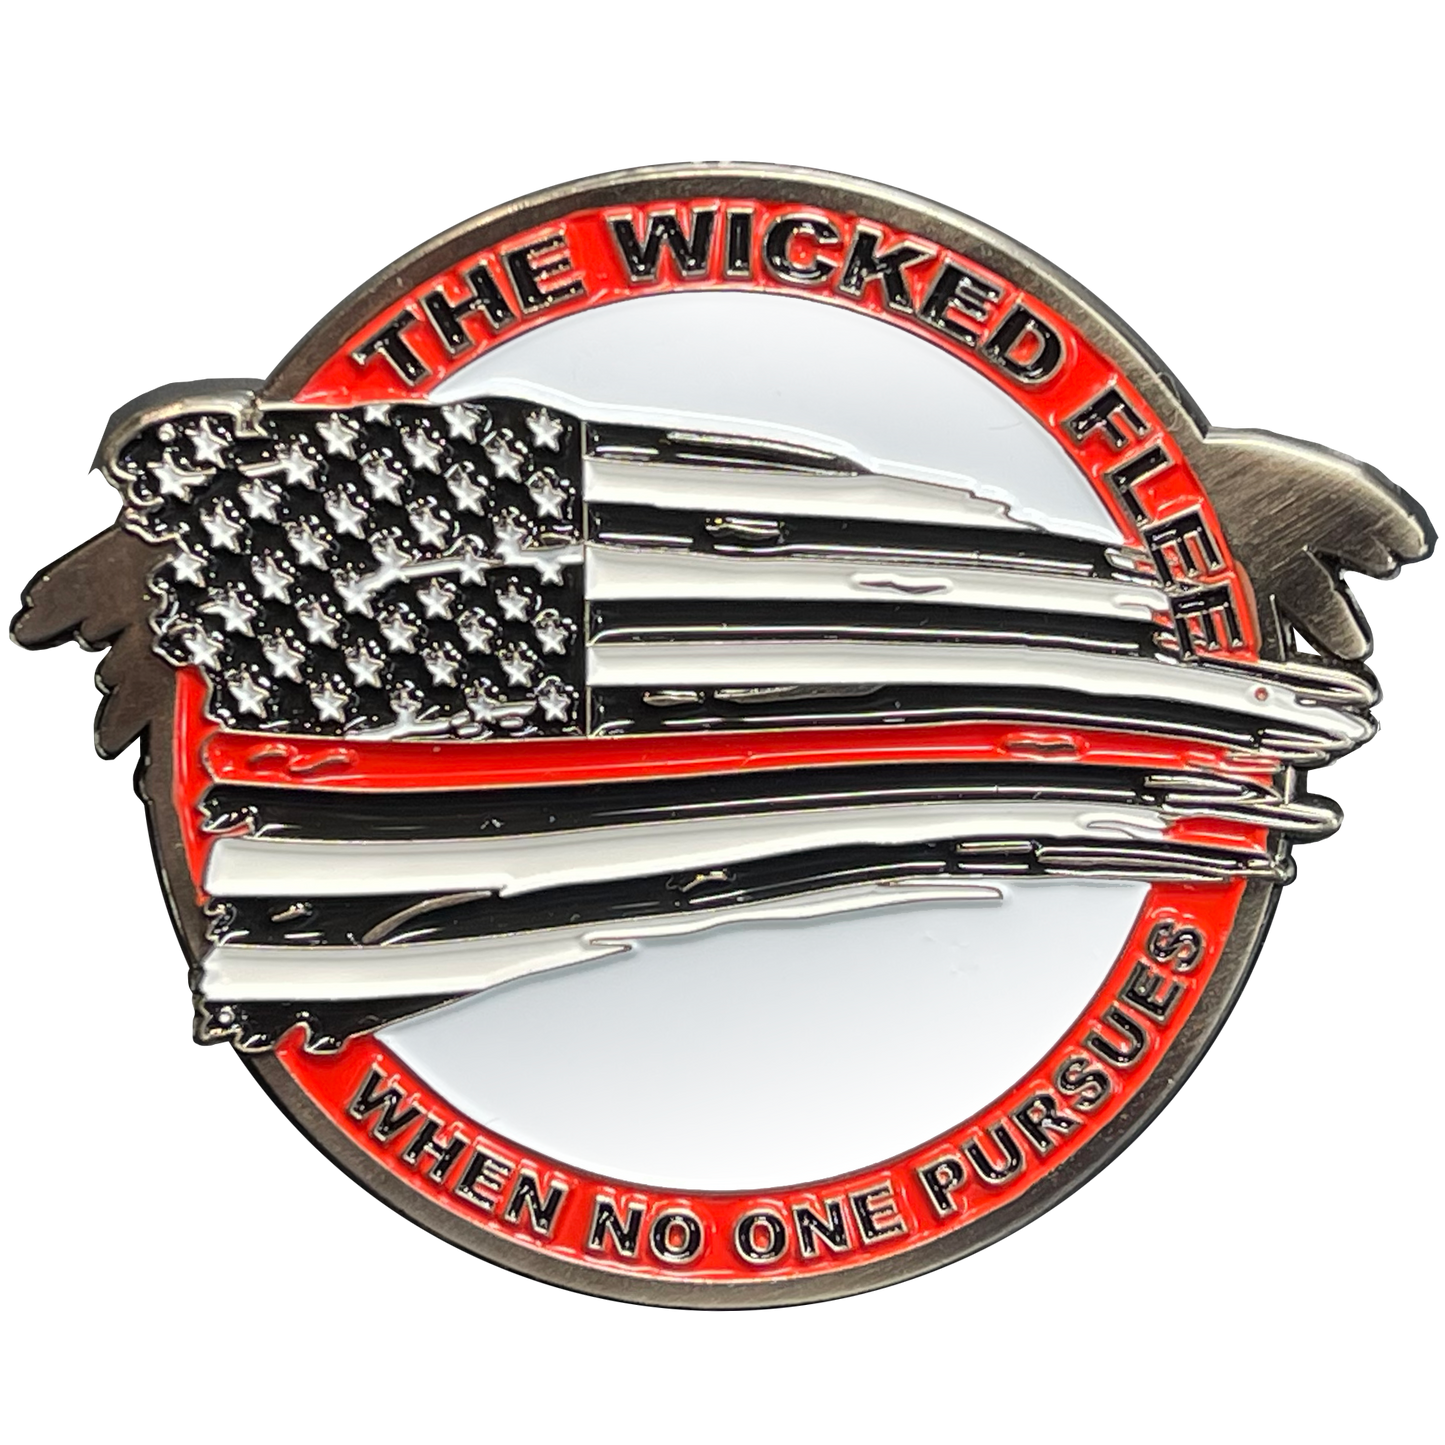 L-19 Thin Red Line Flag and Eagle Fire Fighter Challenge Coin Fire Department Fire House Firefighter